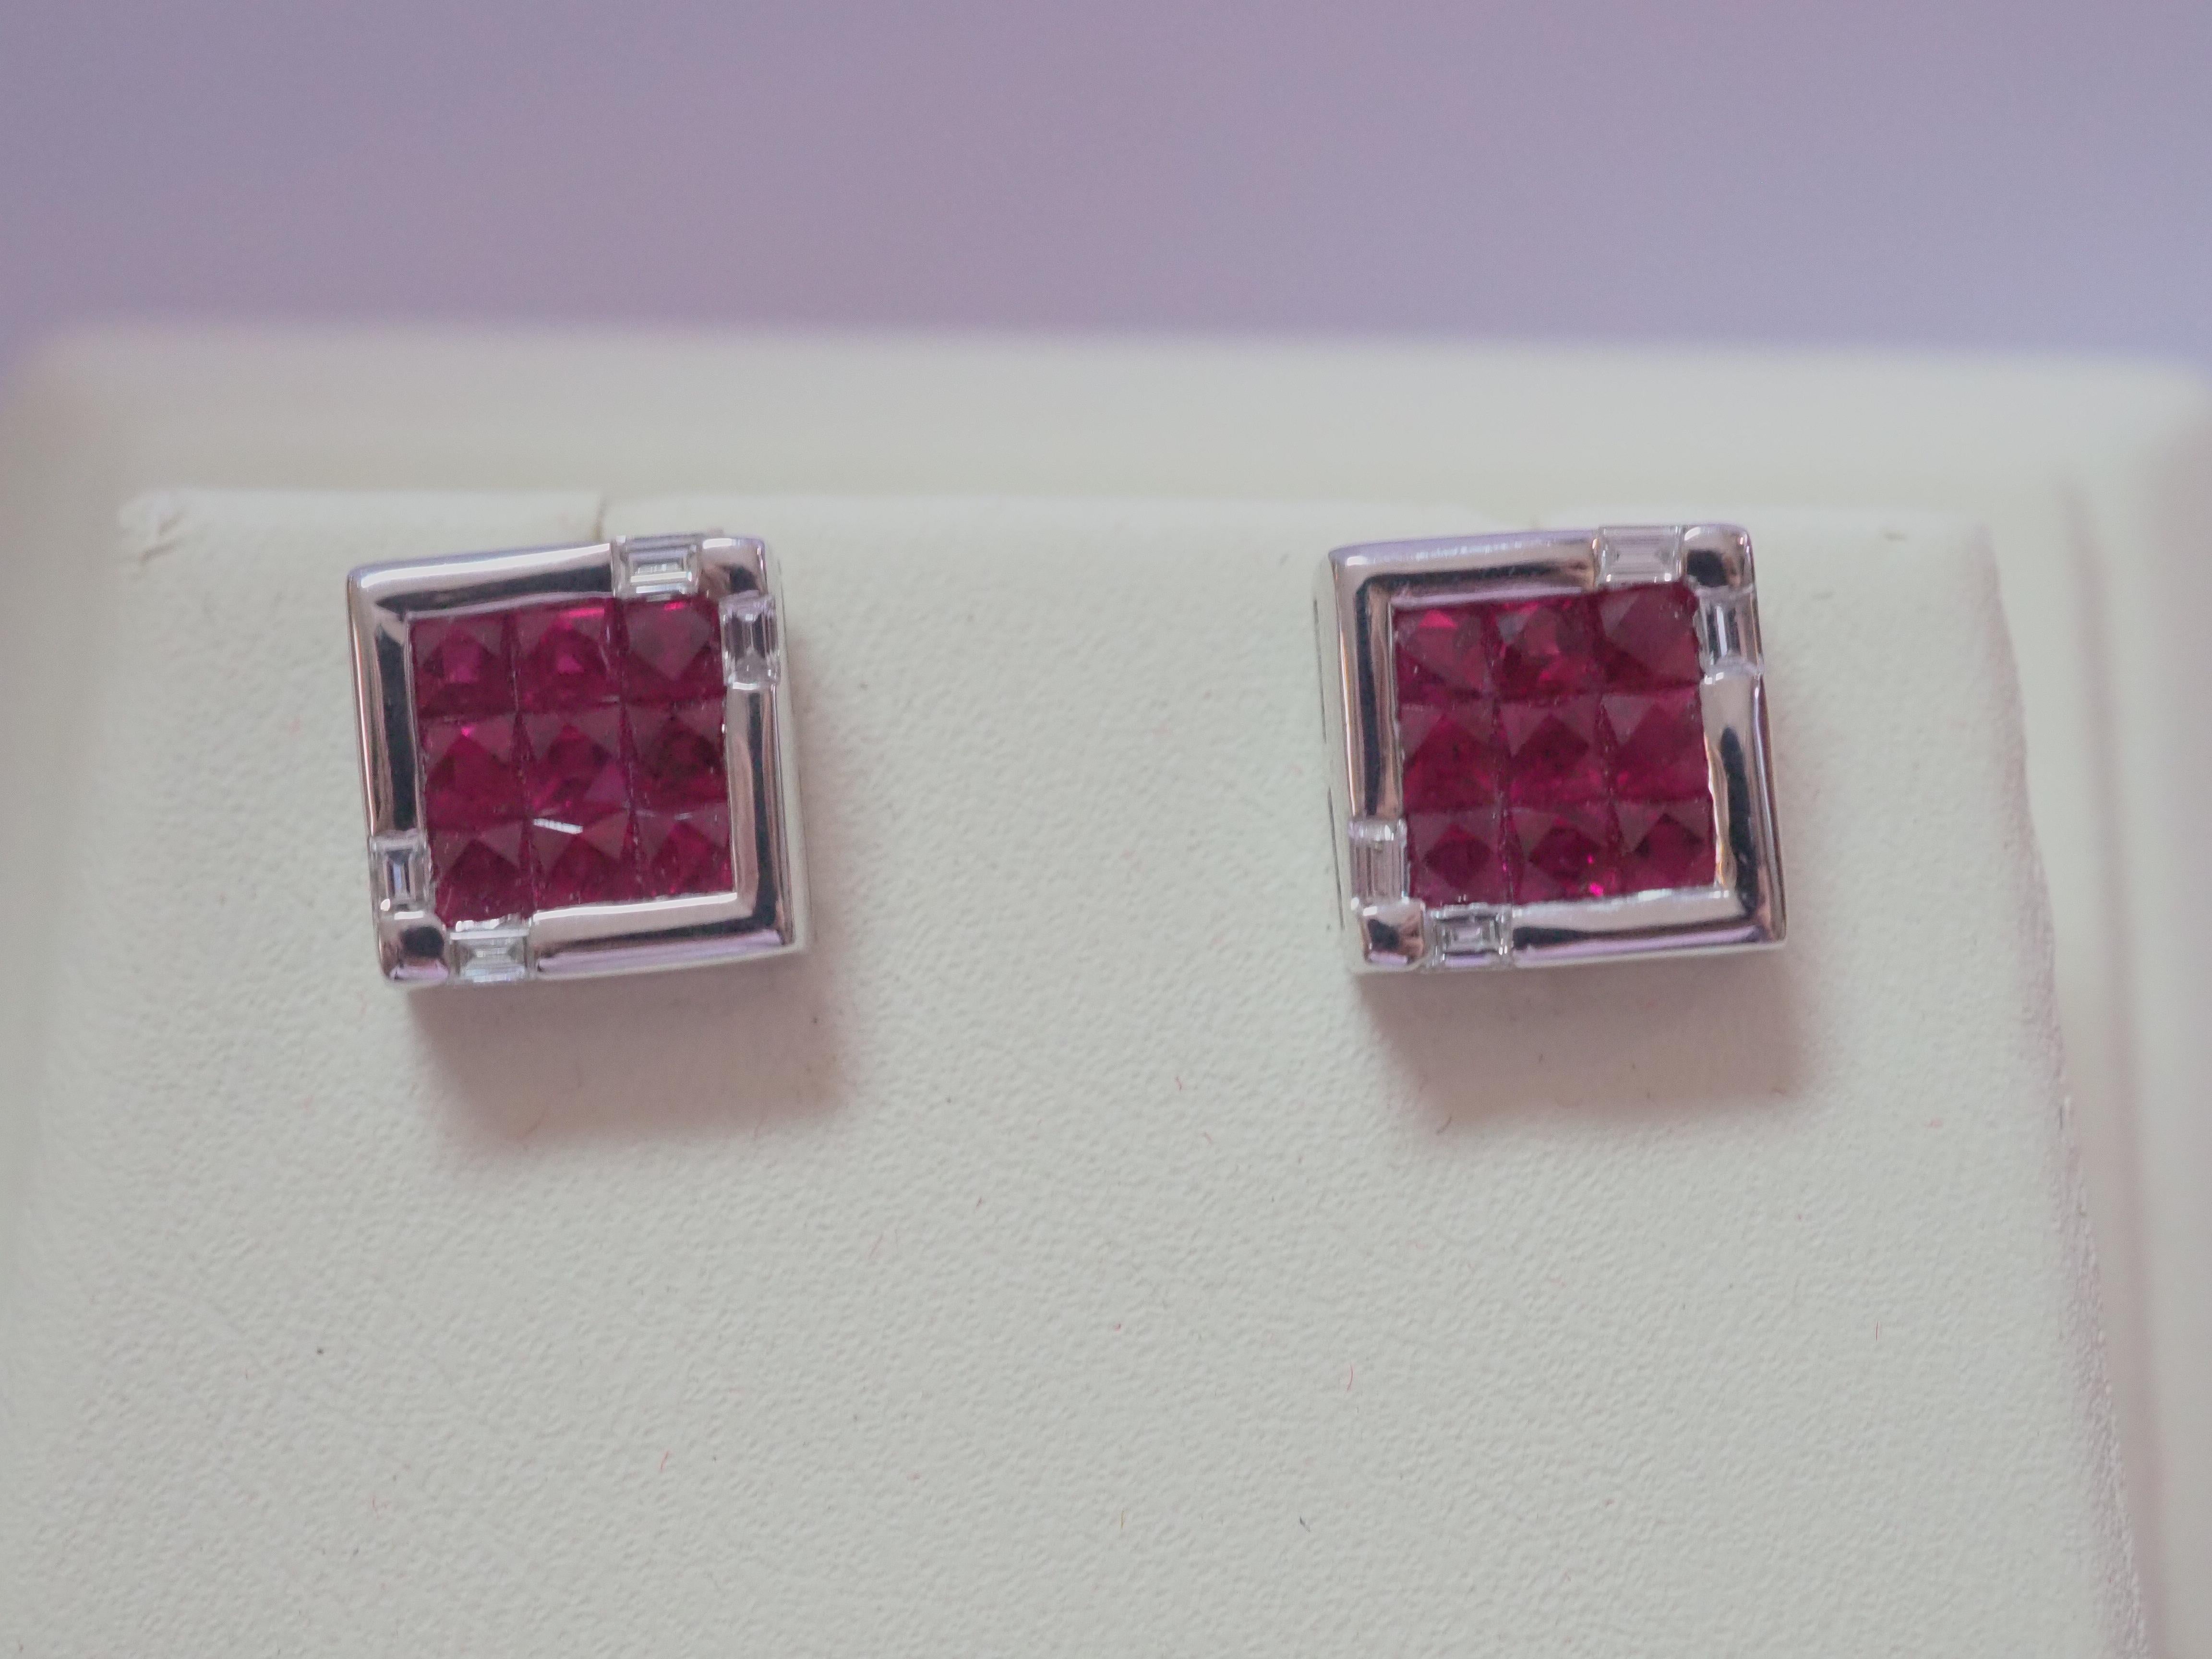 Beautiful and unique earrings made in the 1990's and has never been worn. The earrings have the unique geometric shape/ symbol with cutting-edge design. Very cool and fashionable.

There are 18 squared red rubies in total and therefore 9 for each